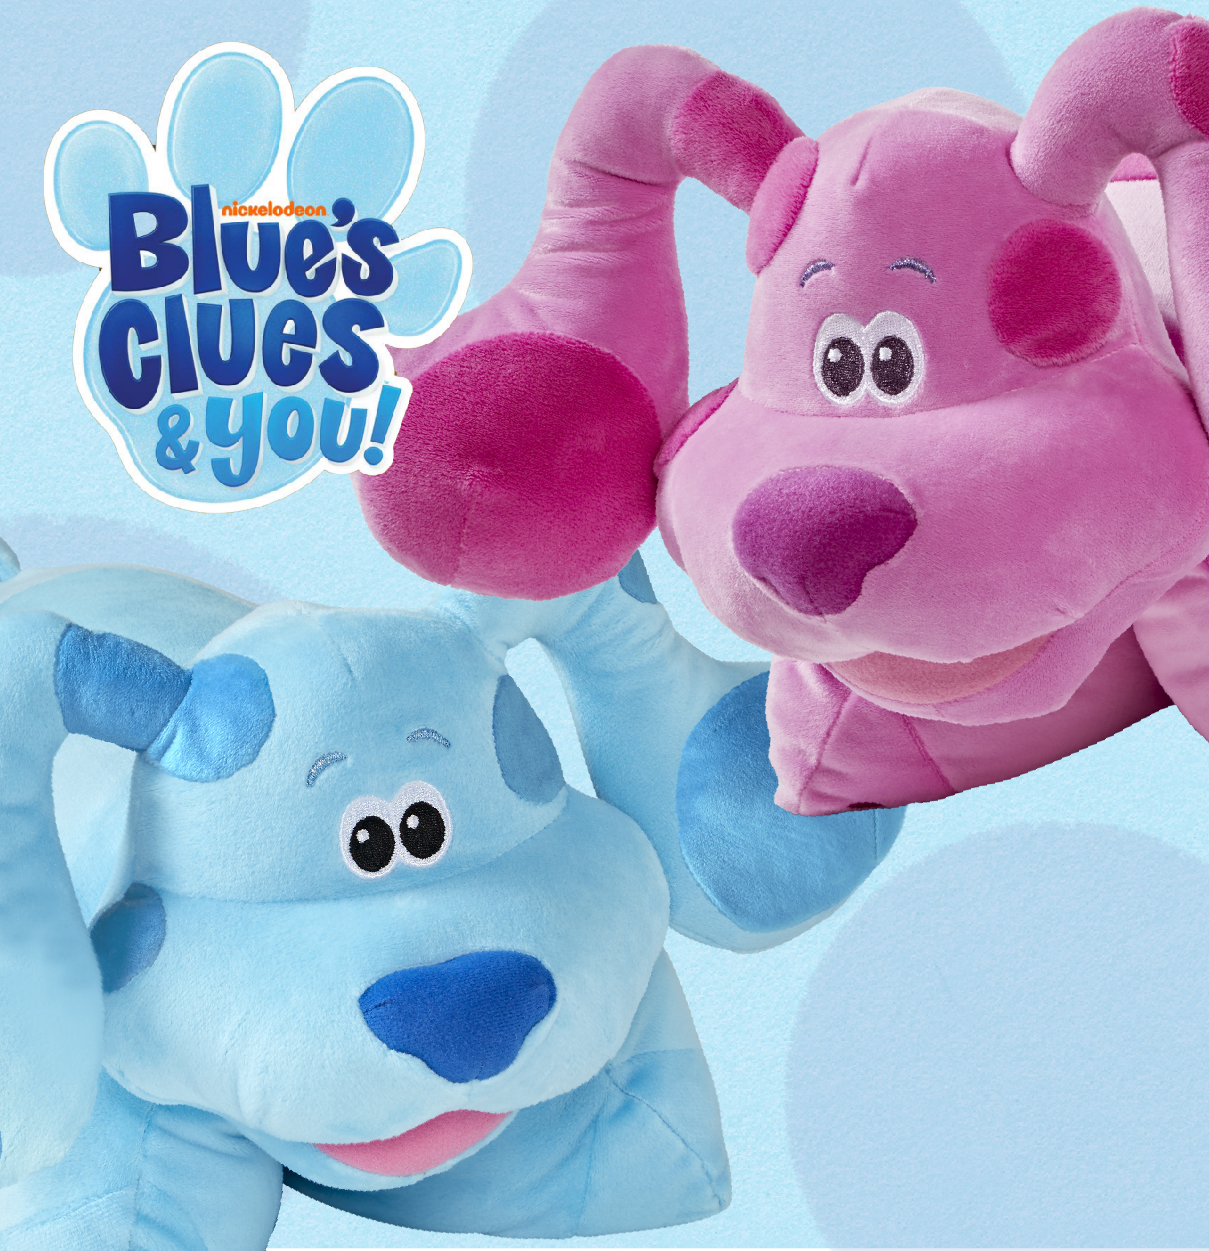 Blues Clues & You Pillow Pets Category, showing Blue the blue puppy and Magenta the pink puppy Pillow Pets.